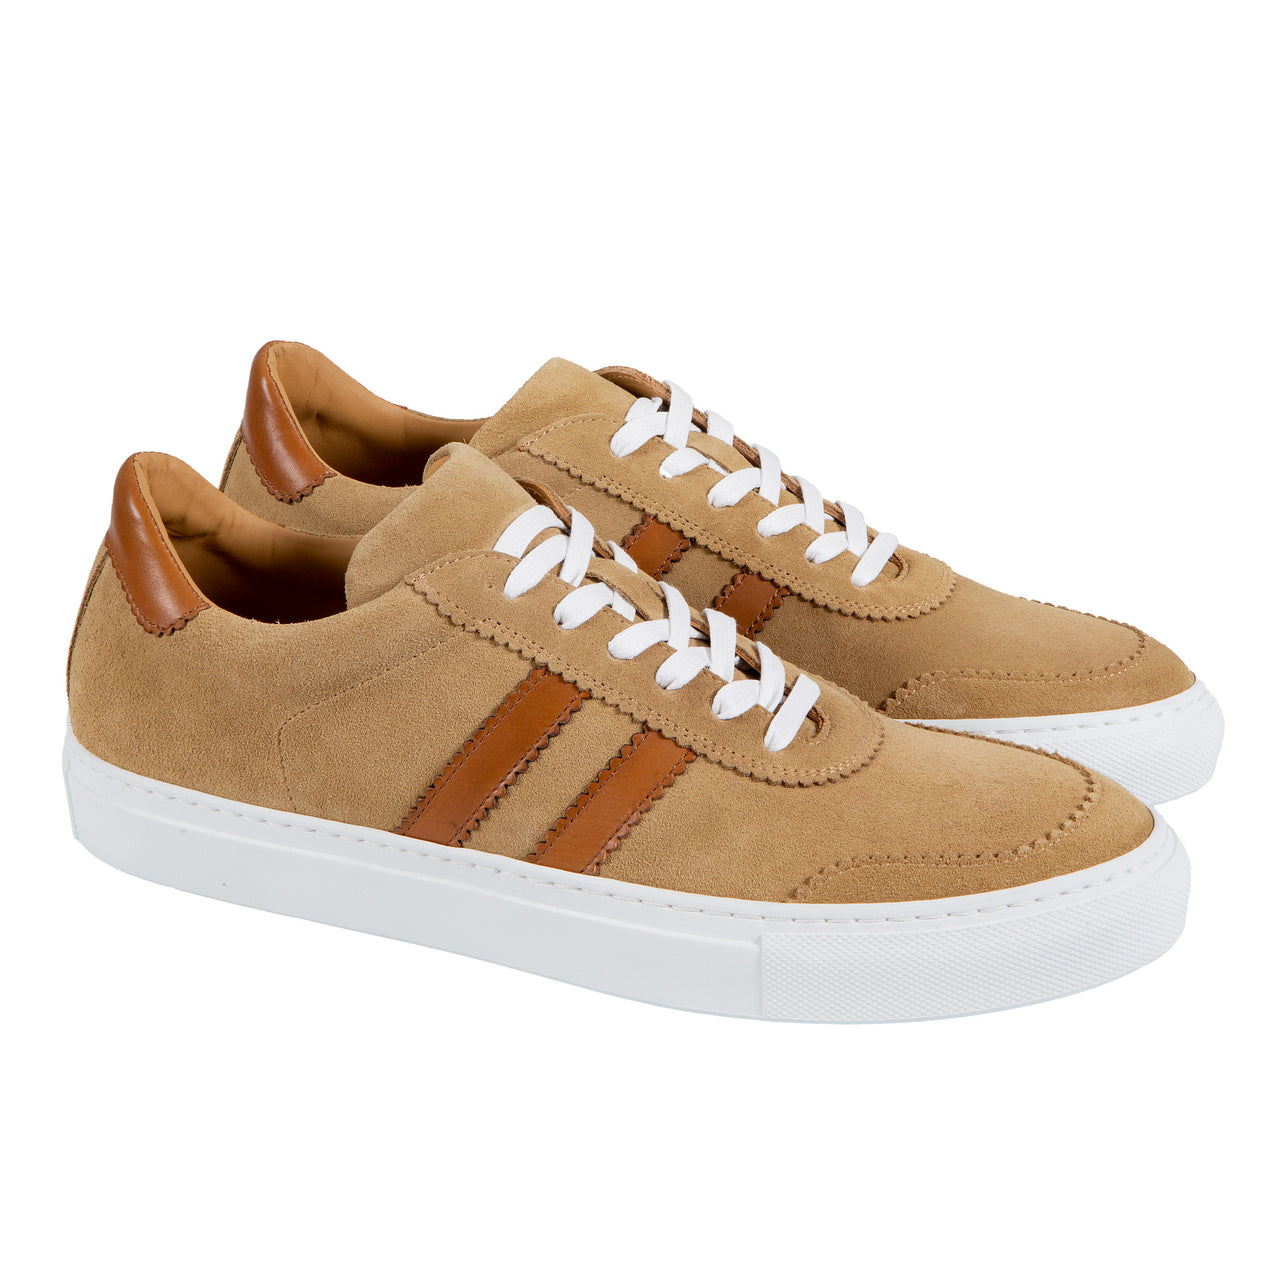 HENRY SARTORIAL Suede Leather Sneakers CAMEL